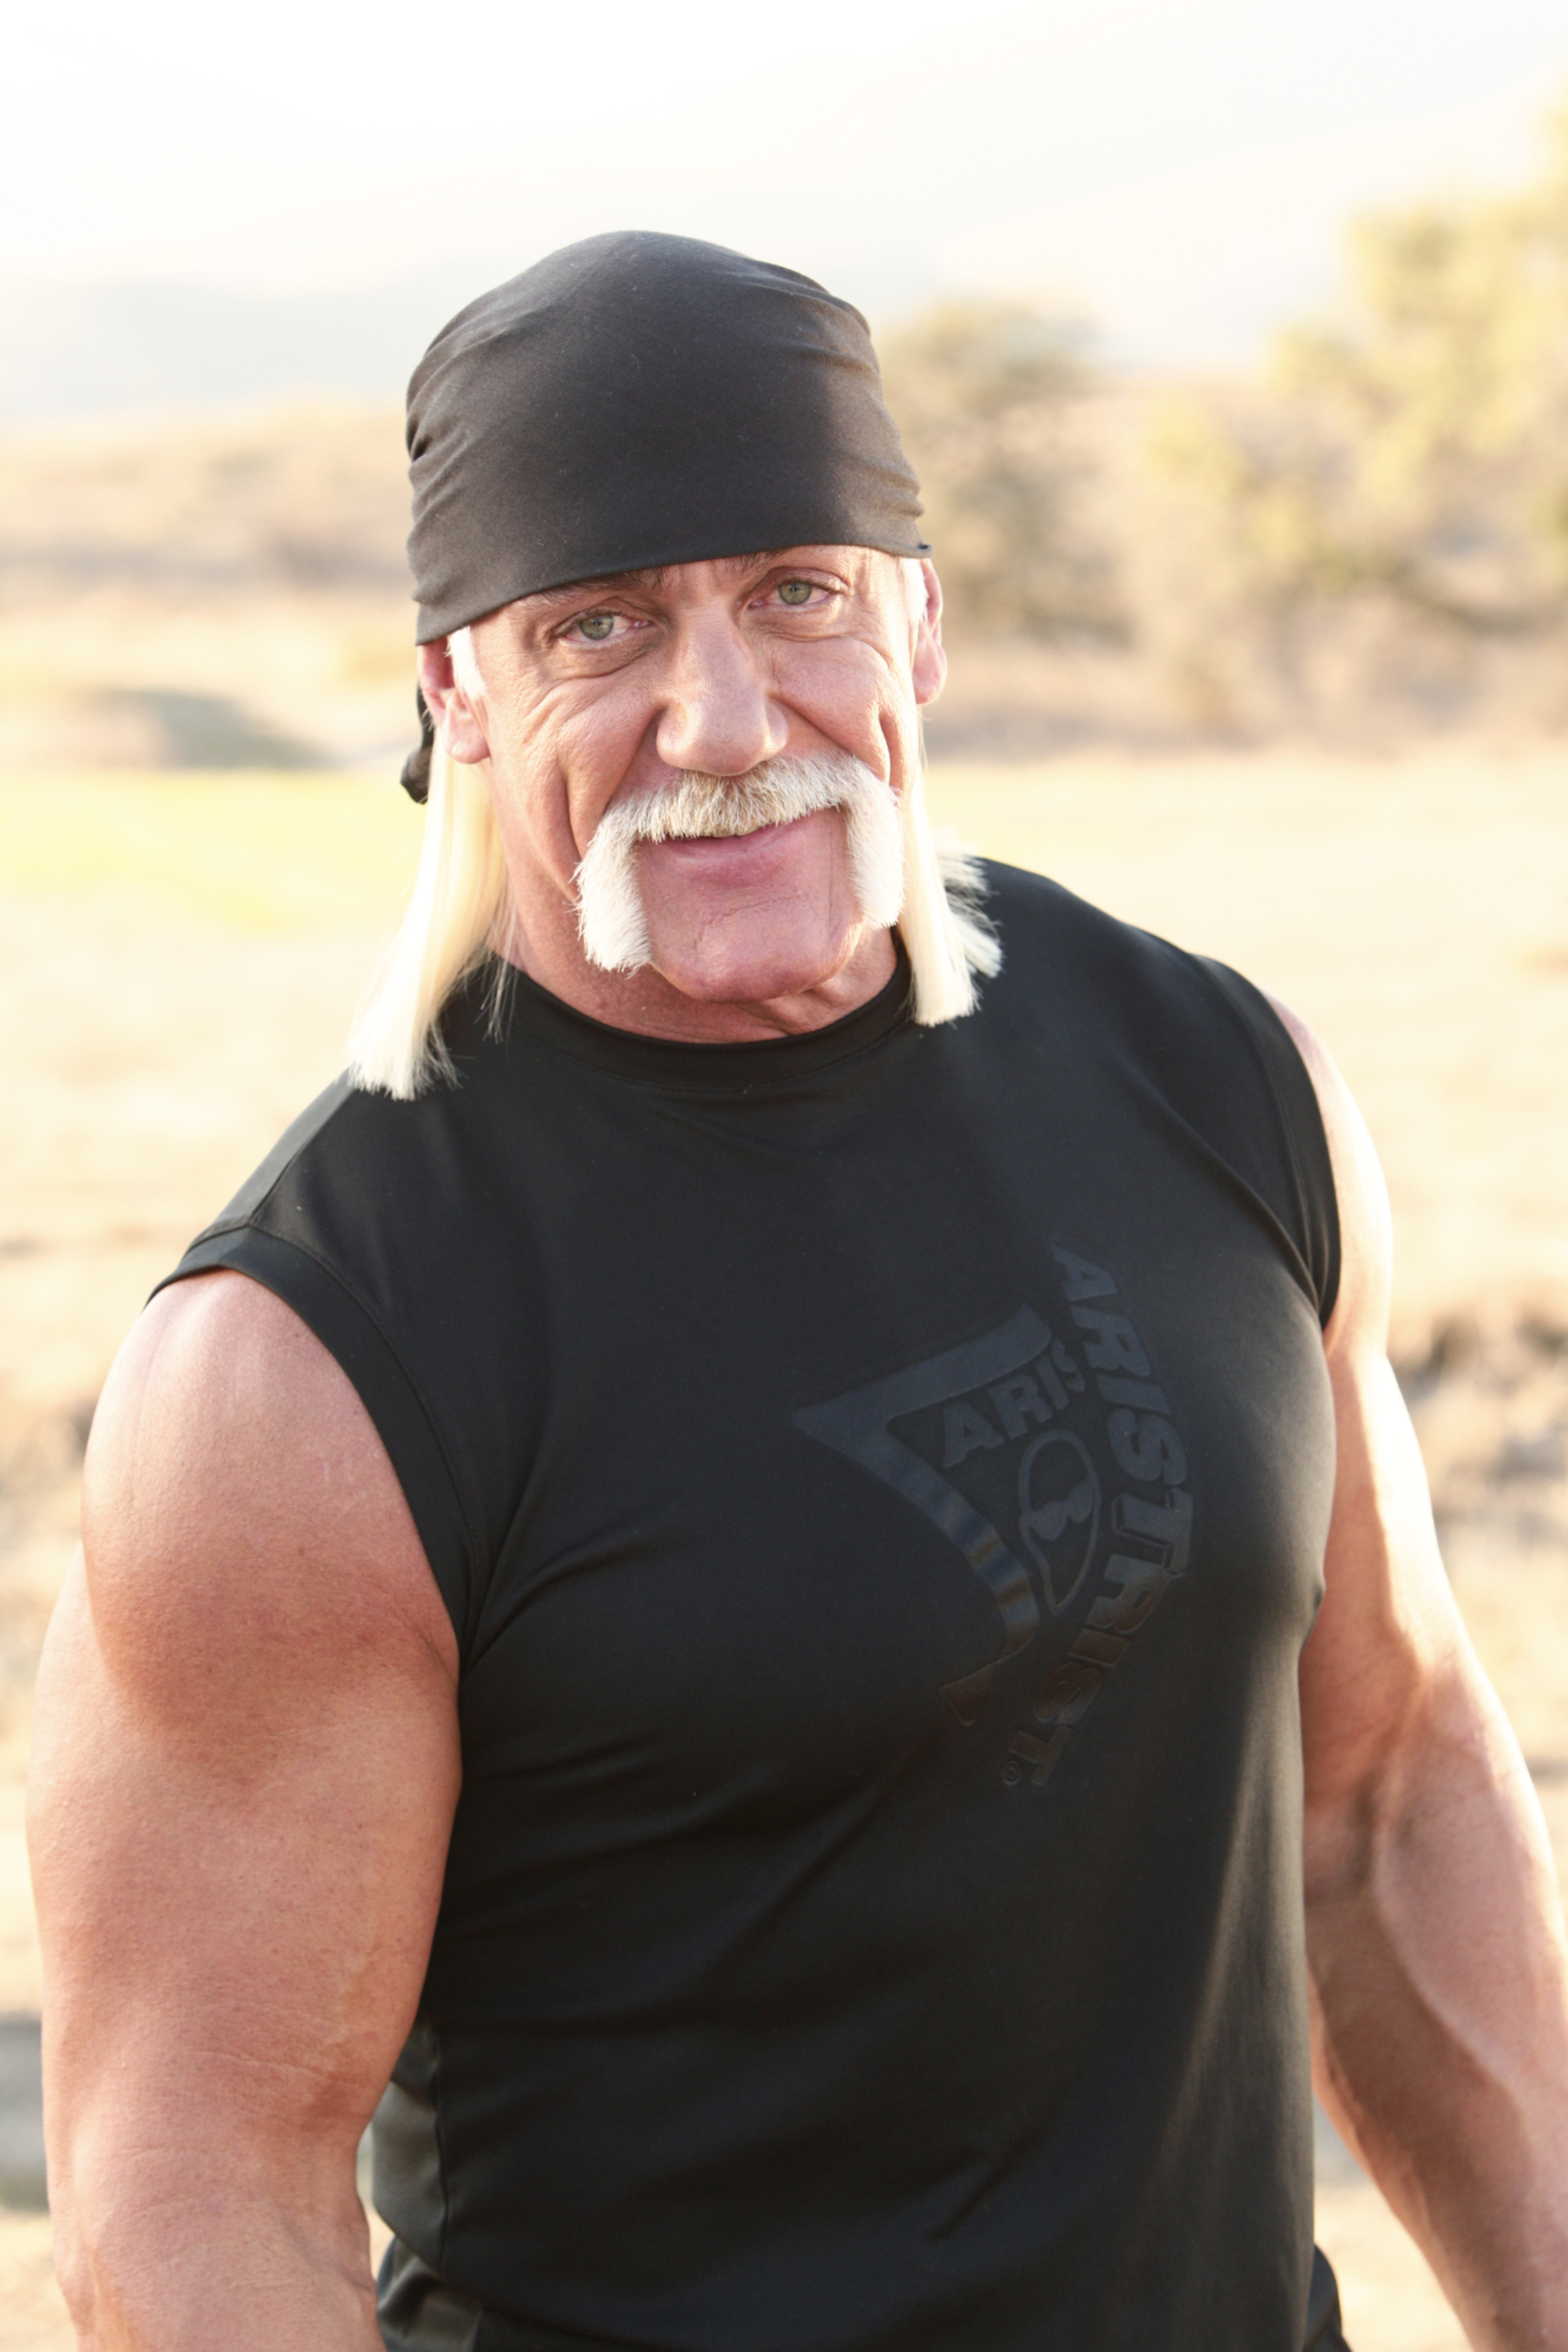 Hulk Hogan to sue over leaked sex tape pic